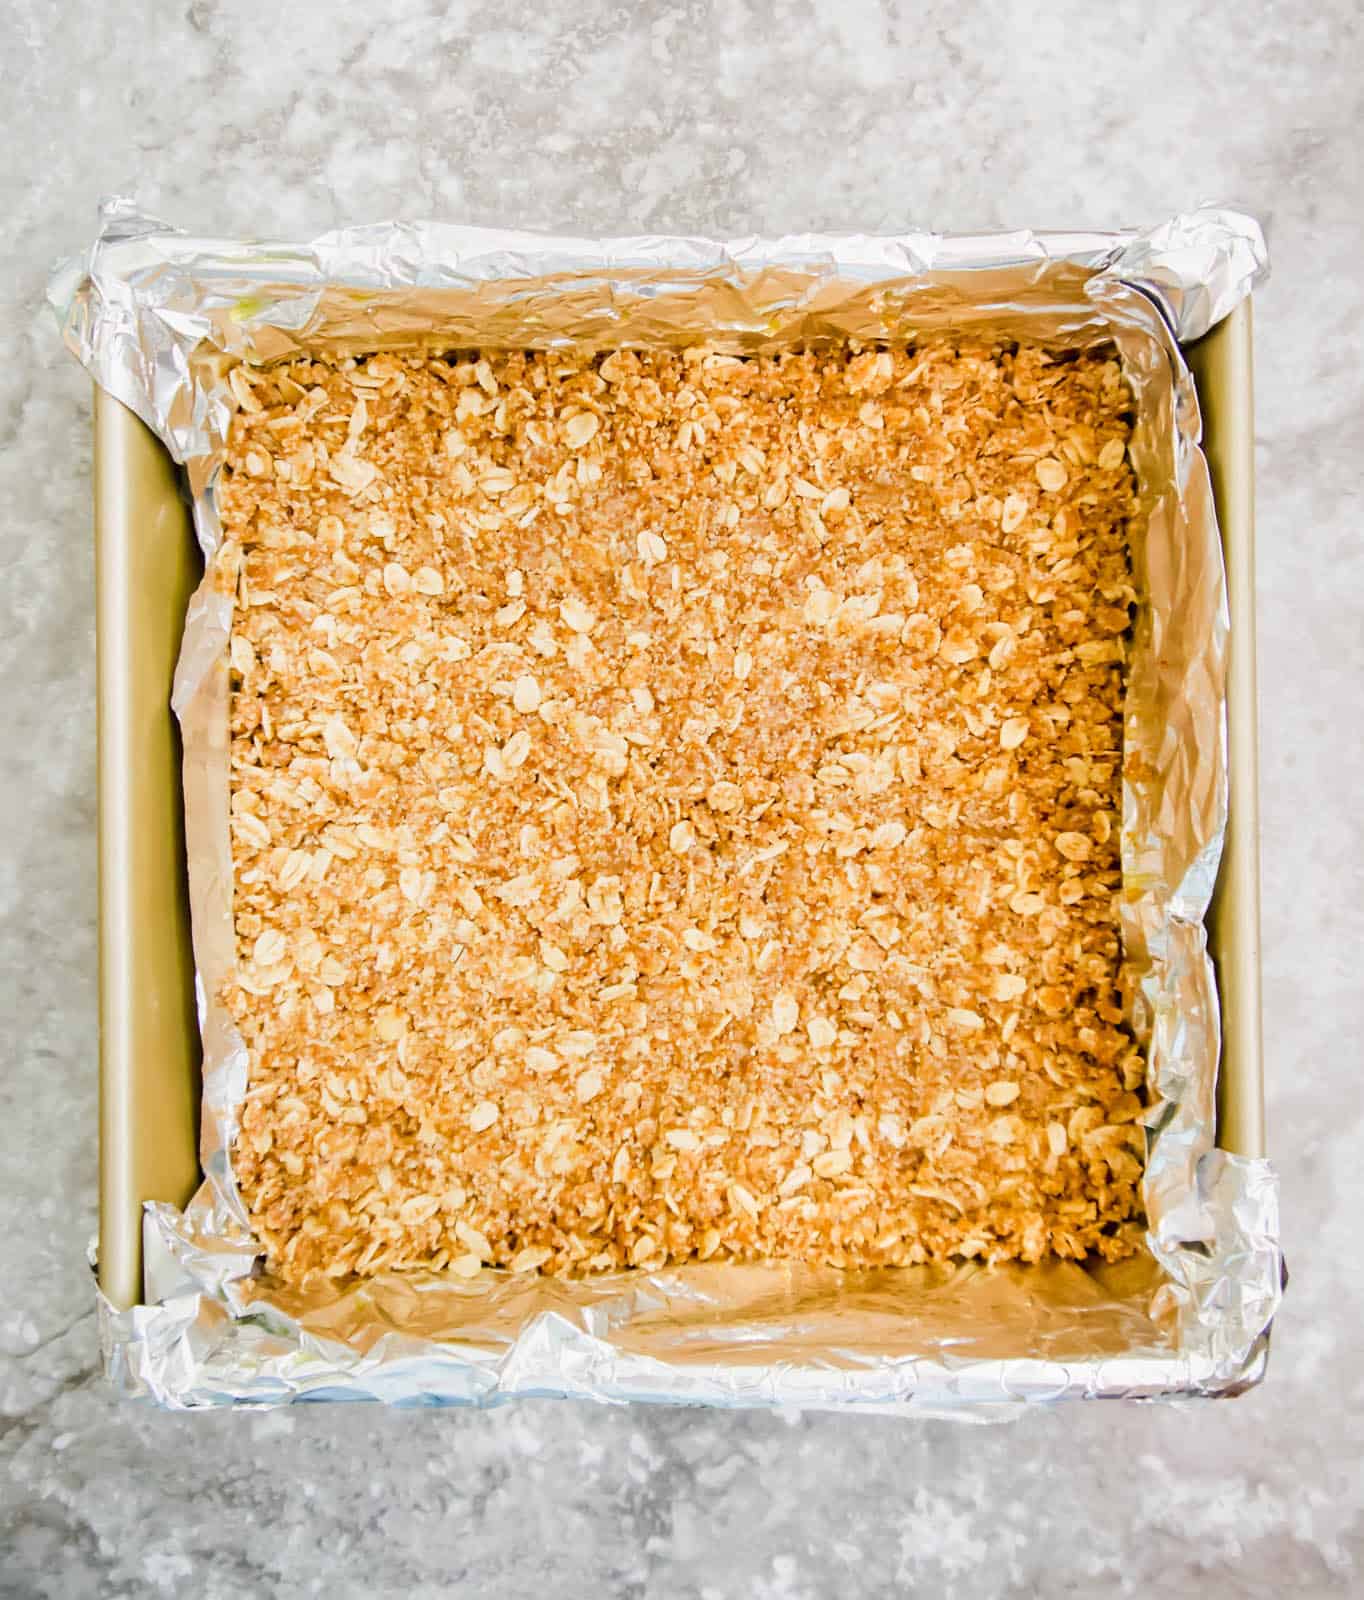 Oat layer of the bars in a pan.